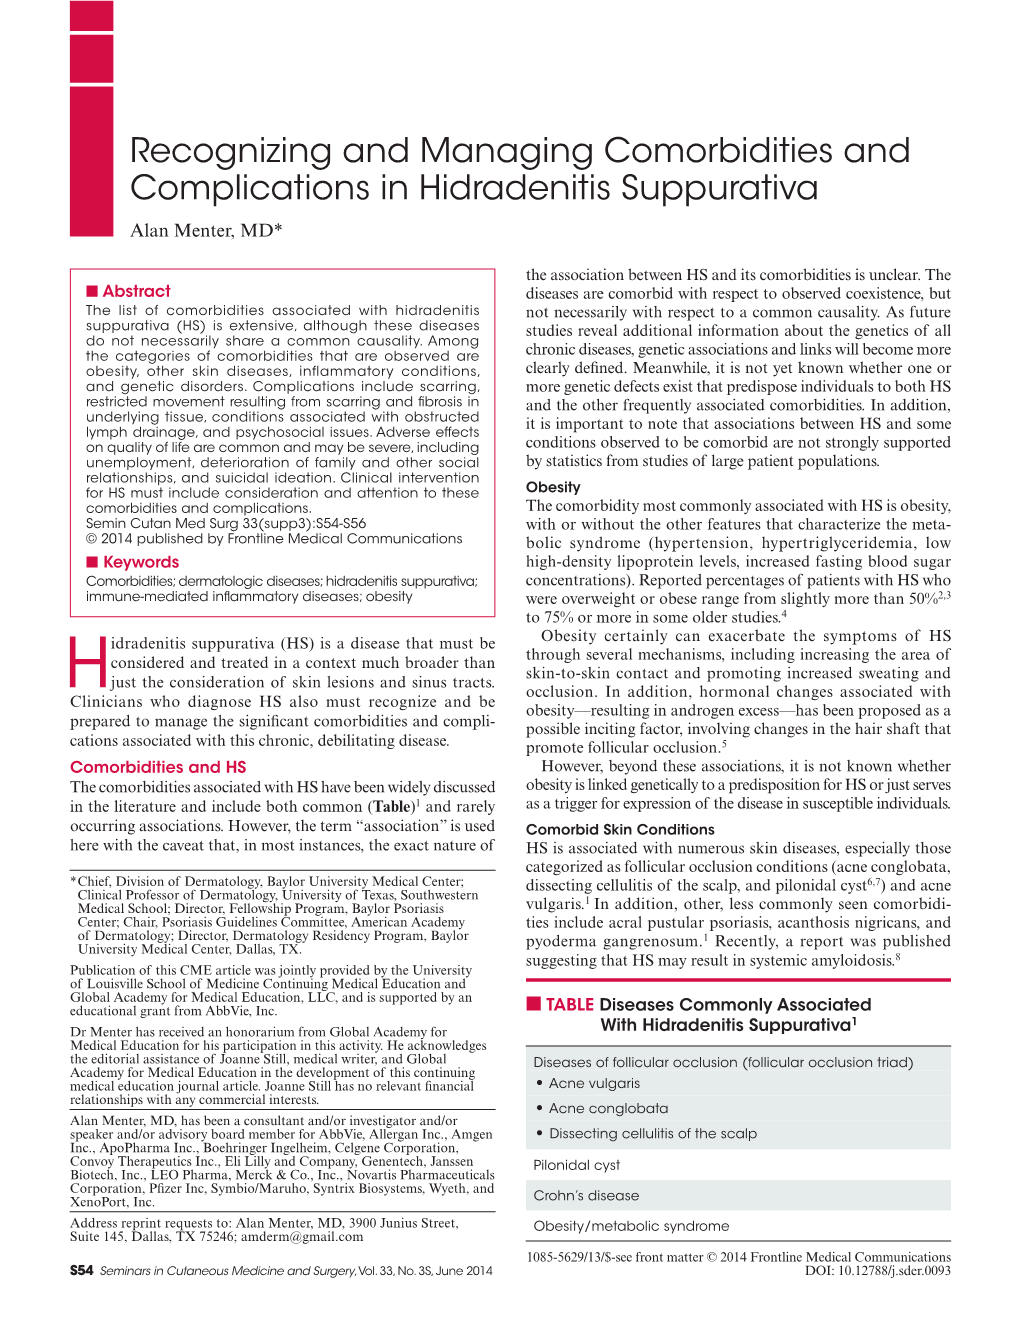 Recognizing and Managing Comorbidities and Complications in Hidradenitis Suppurativa Alan Menter, MD*